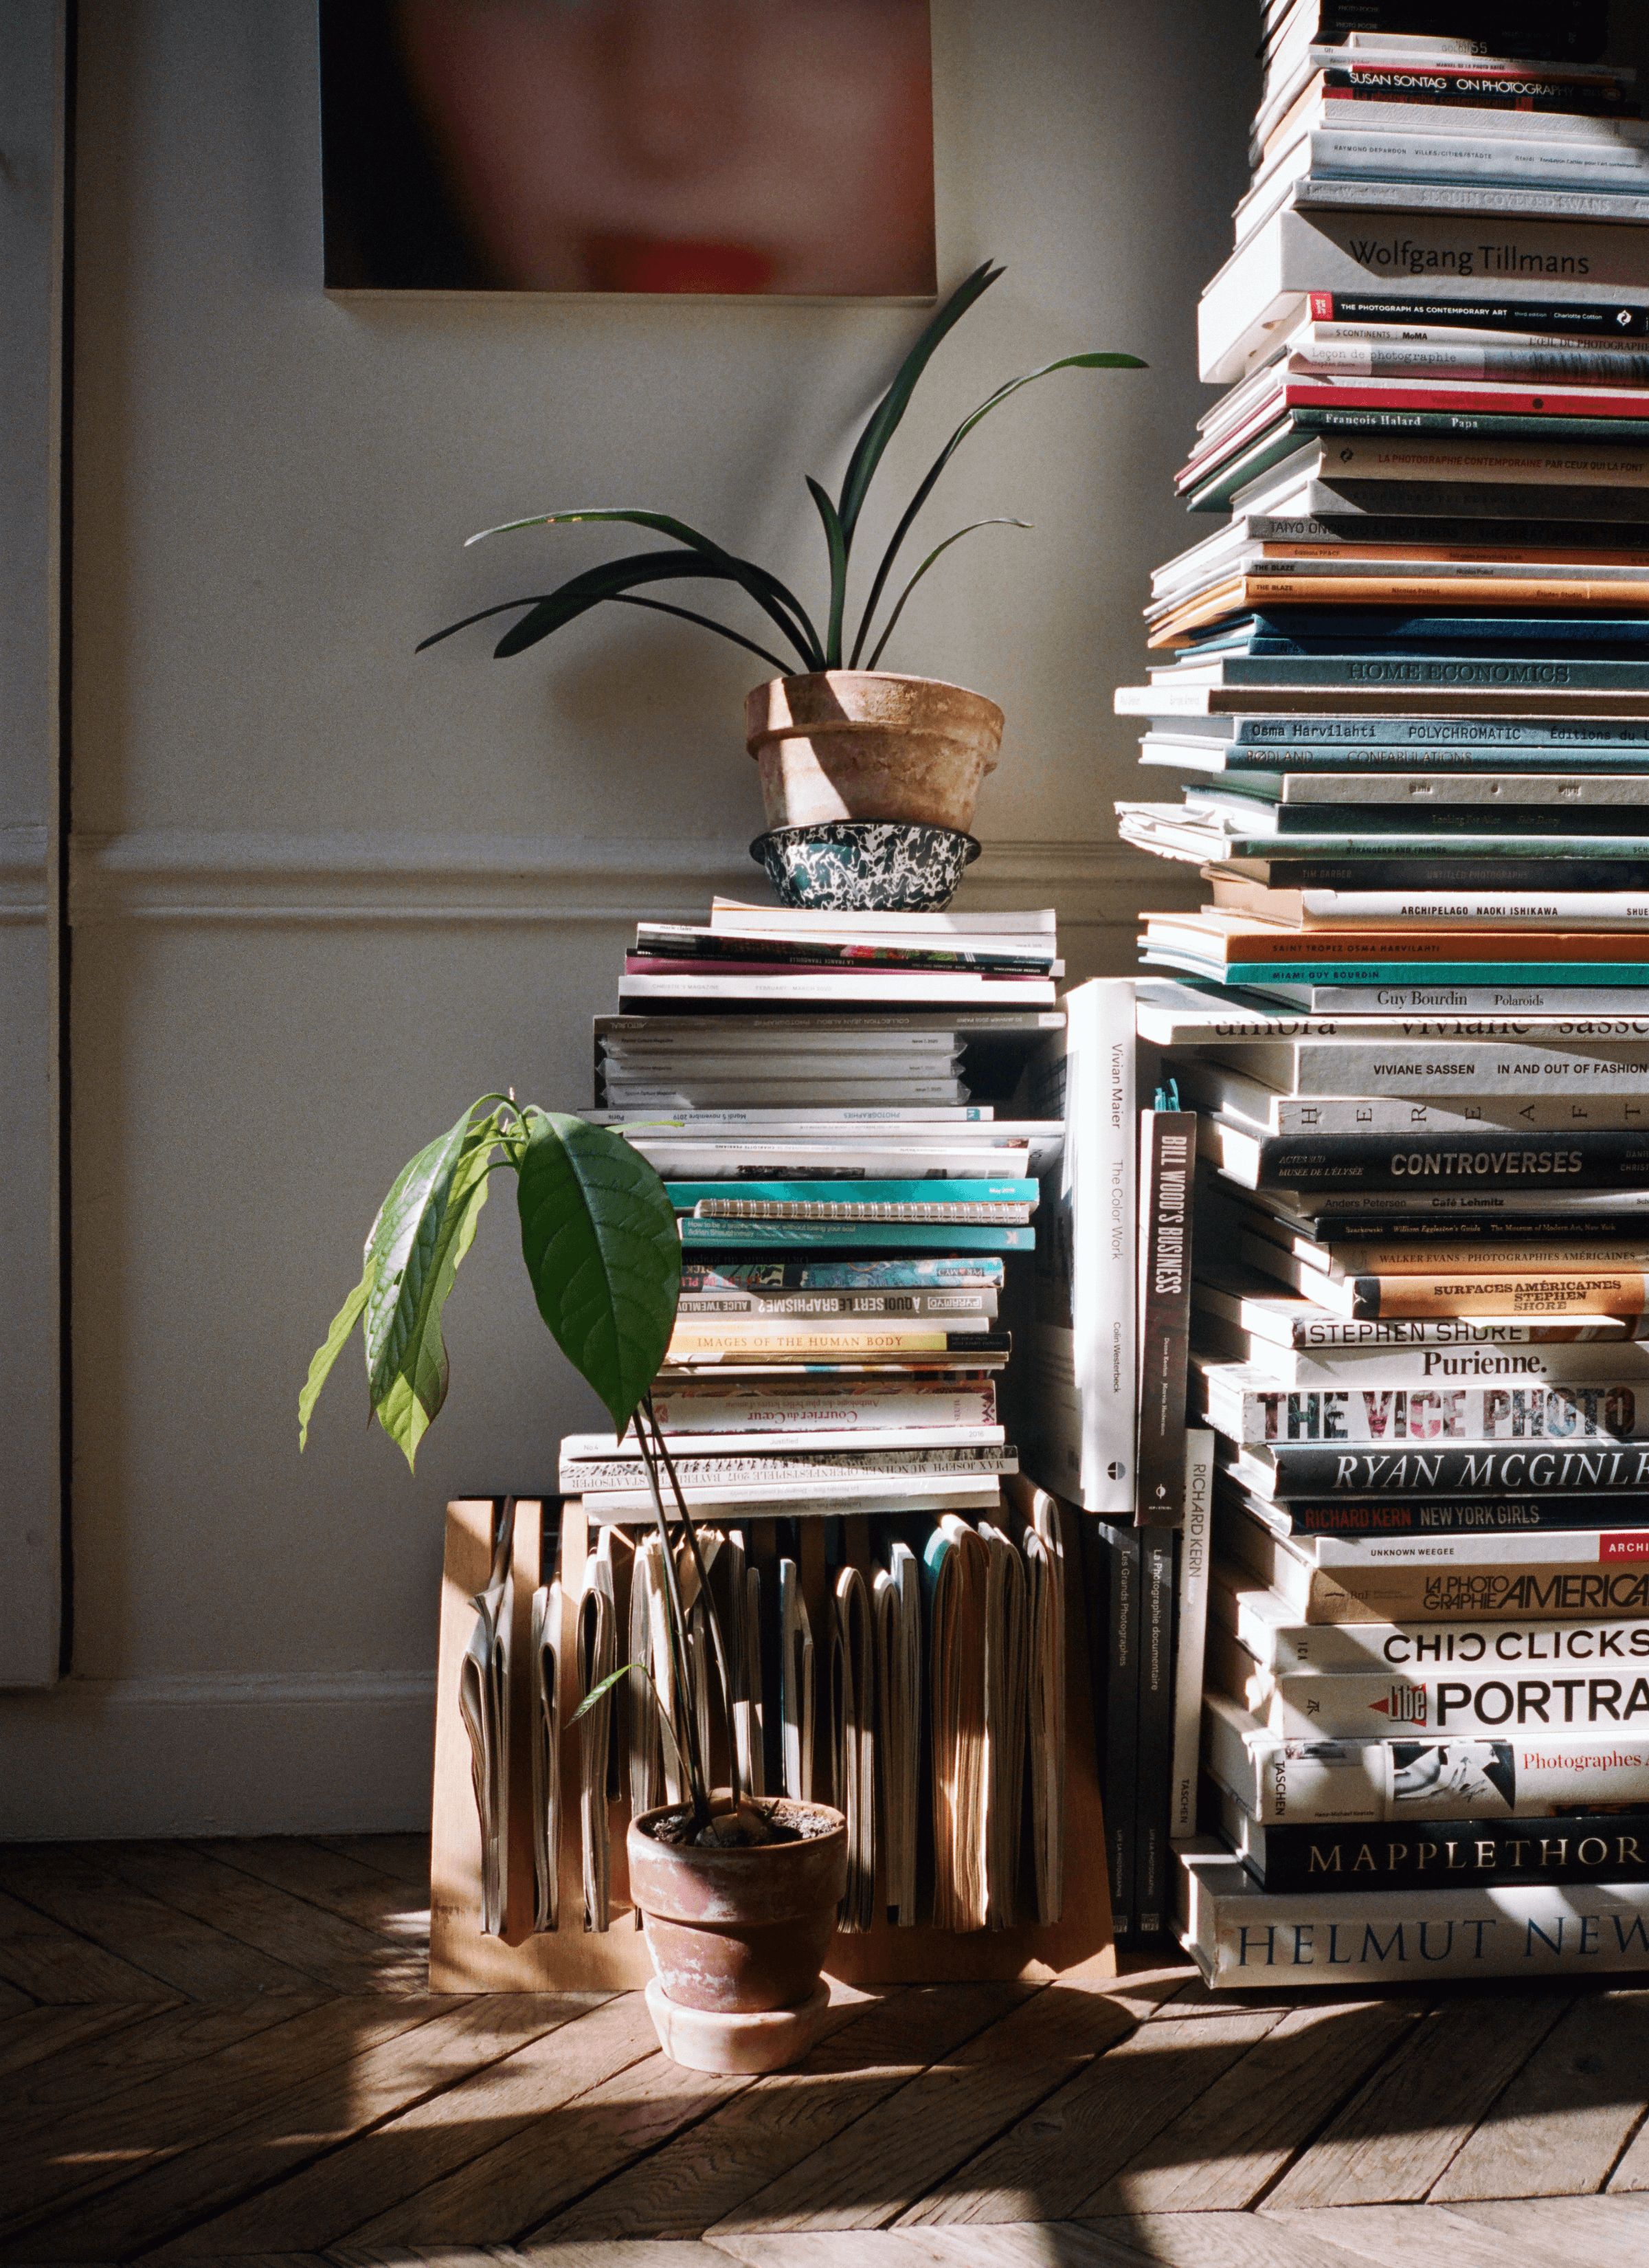 Stacks of books leaning on the wall while a pot of plant sits on the top of it and another pot nearby.